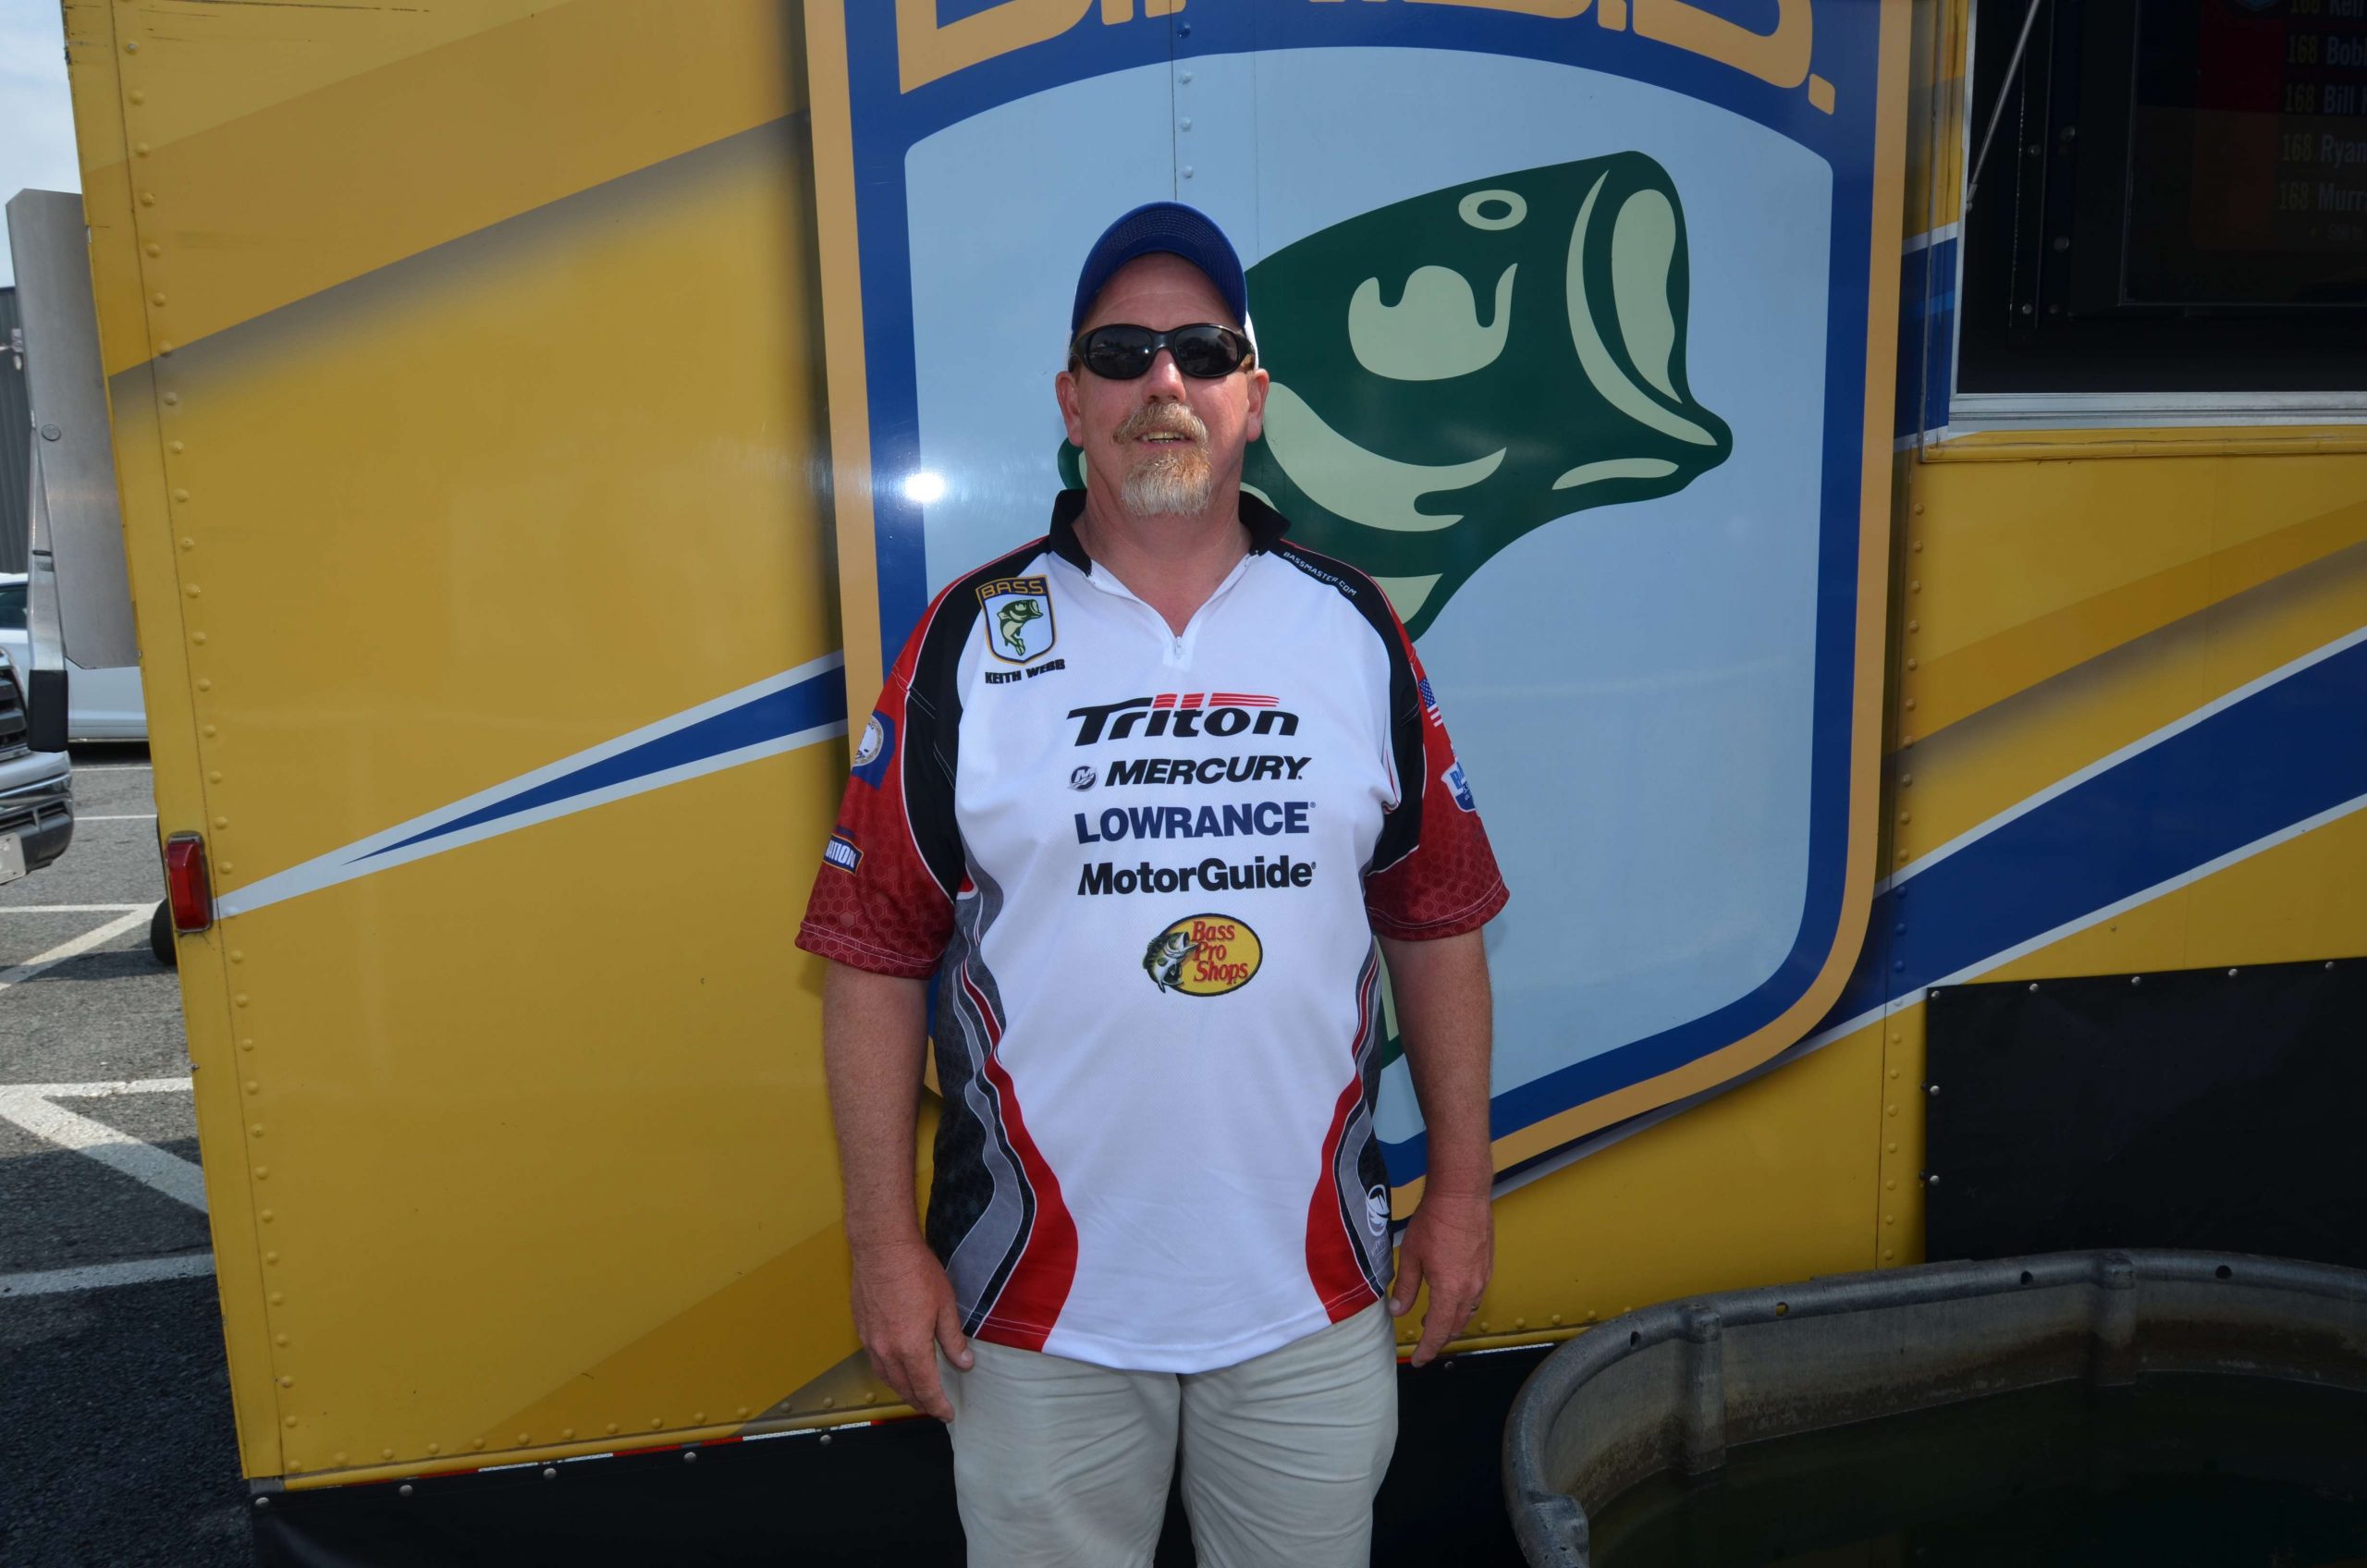 <h4>
Keith	Webb</h4>
Virginia Boater<br>
B.A.S.S. Nation Club:  Virginia Bassmasters<BR>
Occupation:  Store Manager (Tidewater Fleet Supply)<BR>
Hobbies: Spending time with my wife and grandkids<BR>
Sponsors: Tidewater Fleet Supply, Price's Transmission, Walker's Truck Service, Rapala, Baldwin Filters, Tectran Mfg., Deka Batteries
